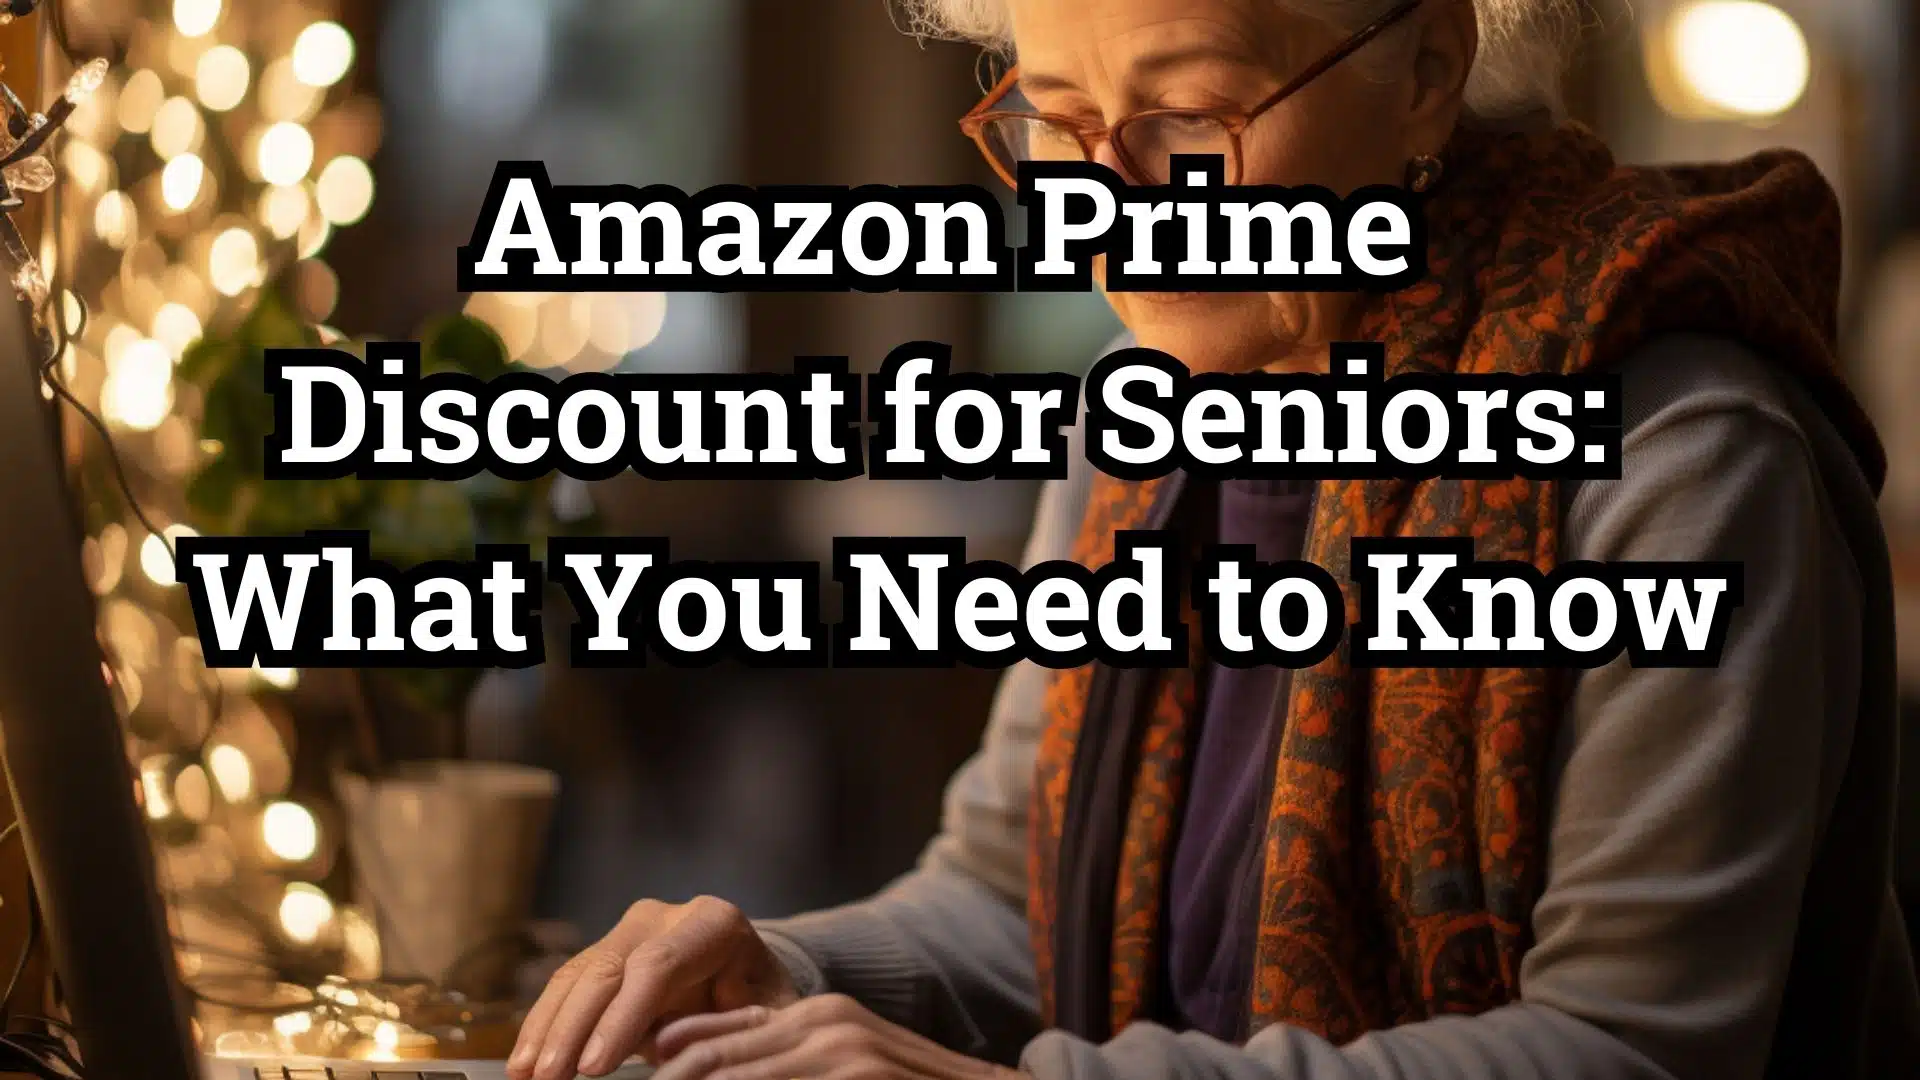 Prime Discount for Seniors: What You Need to Know